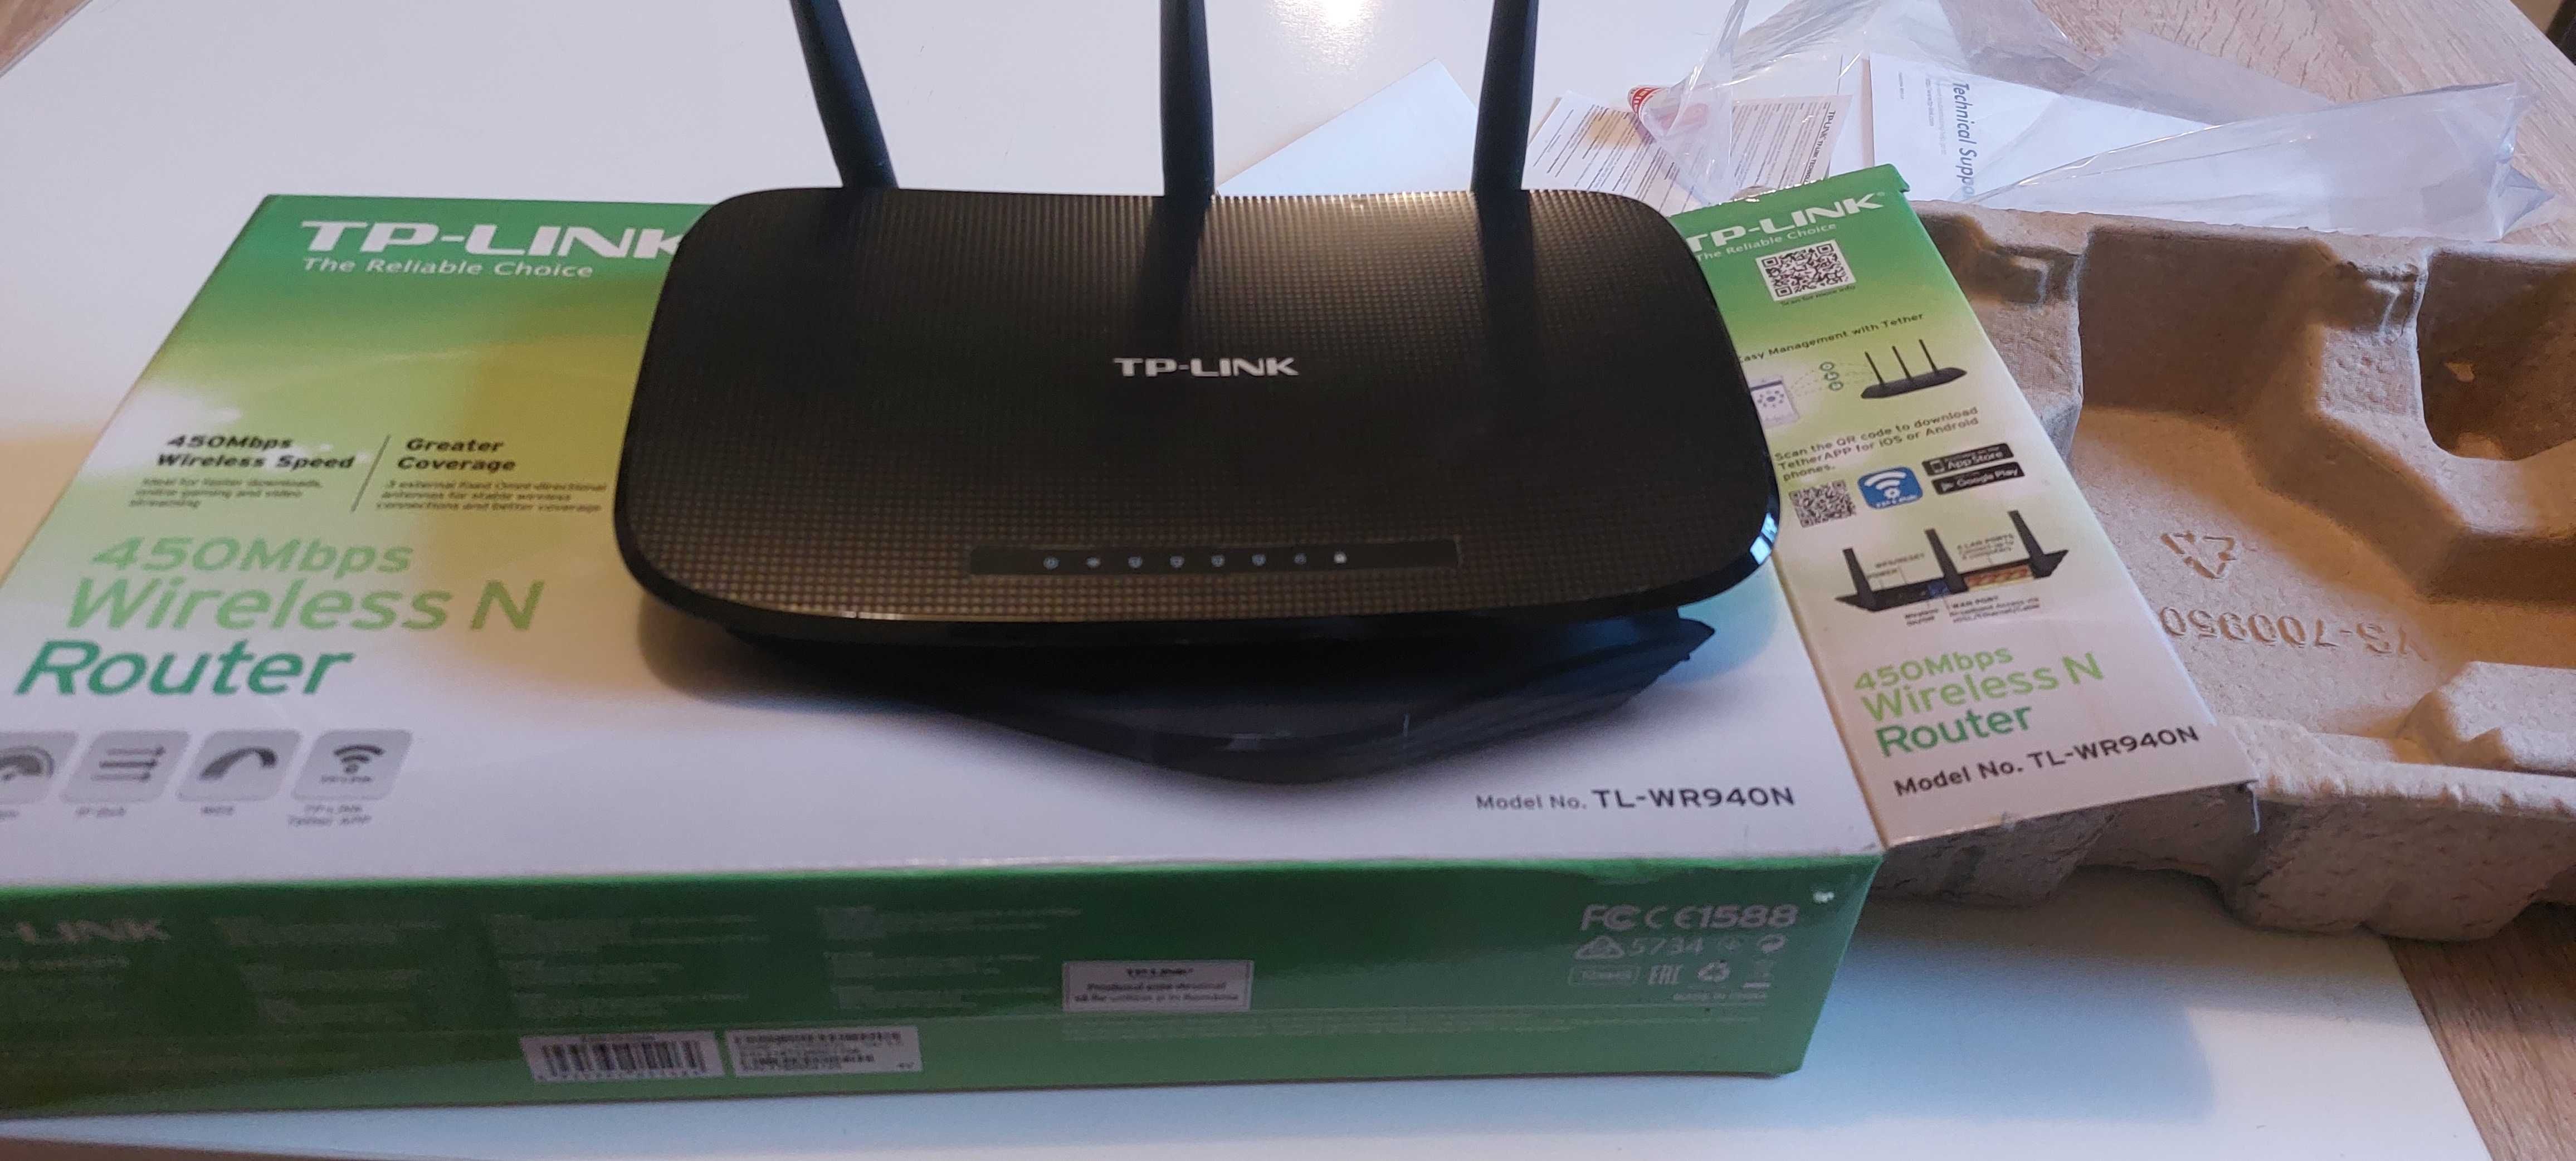 Router Wireless TP-Link TL-WR940N 450Mbps AC450